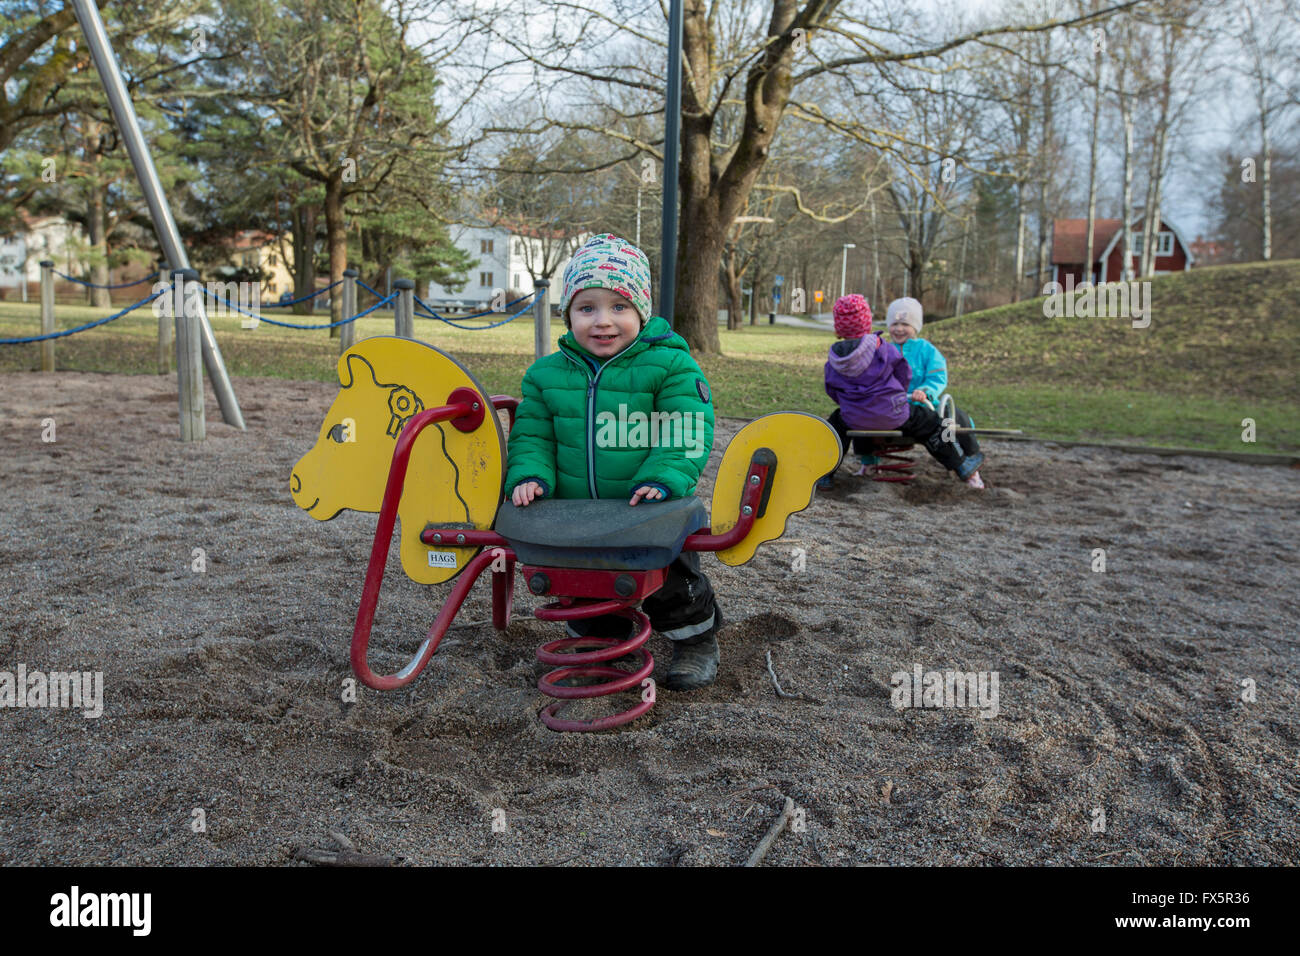 Children playing on a playground Stock Photo